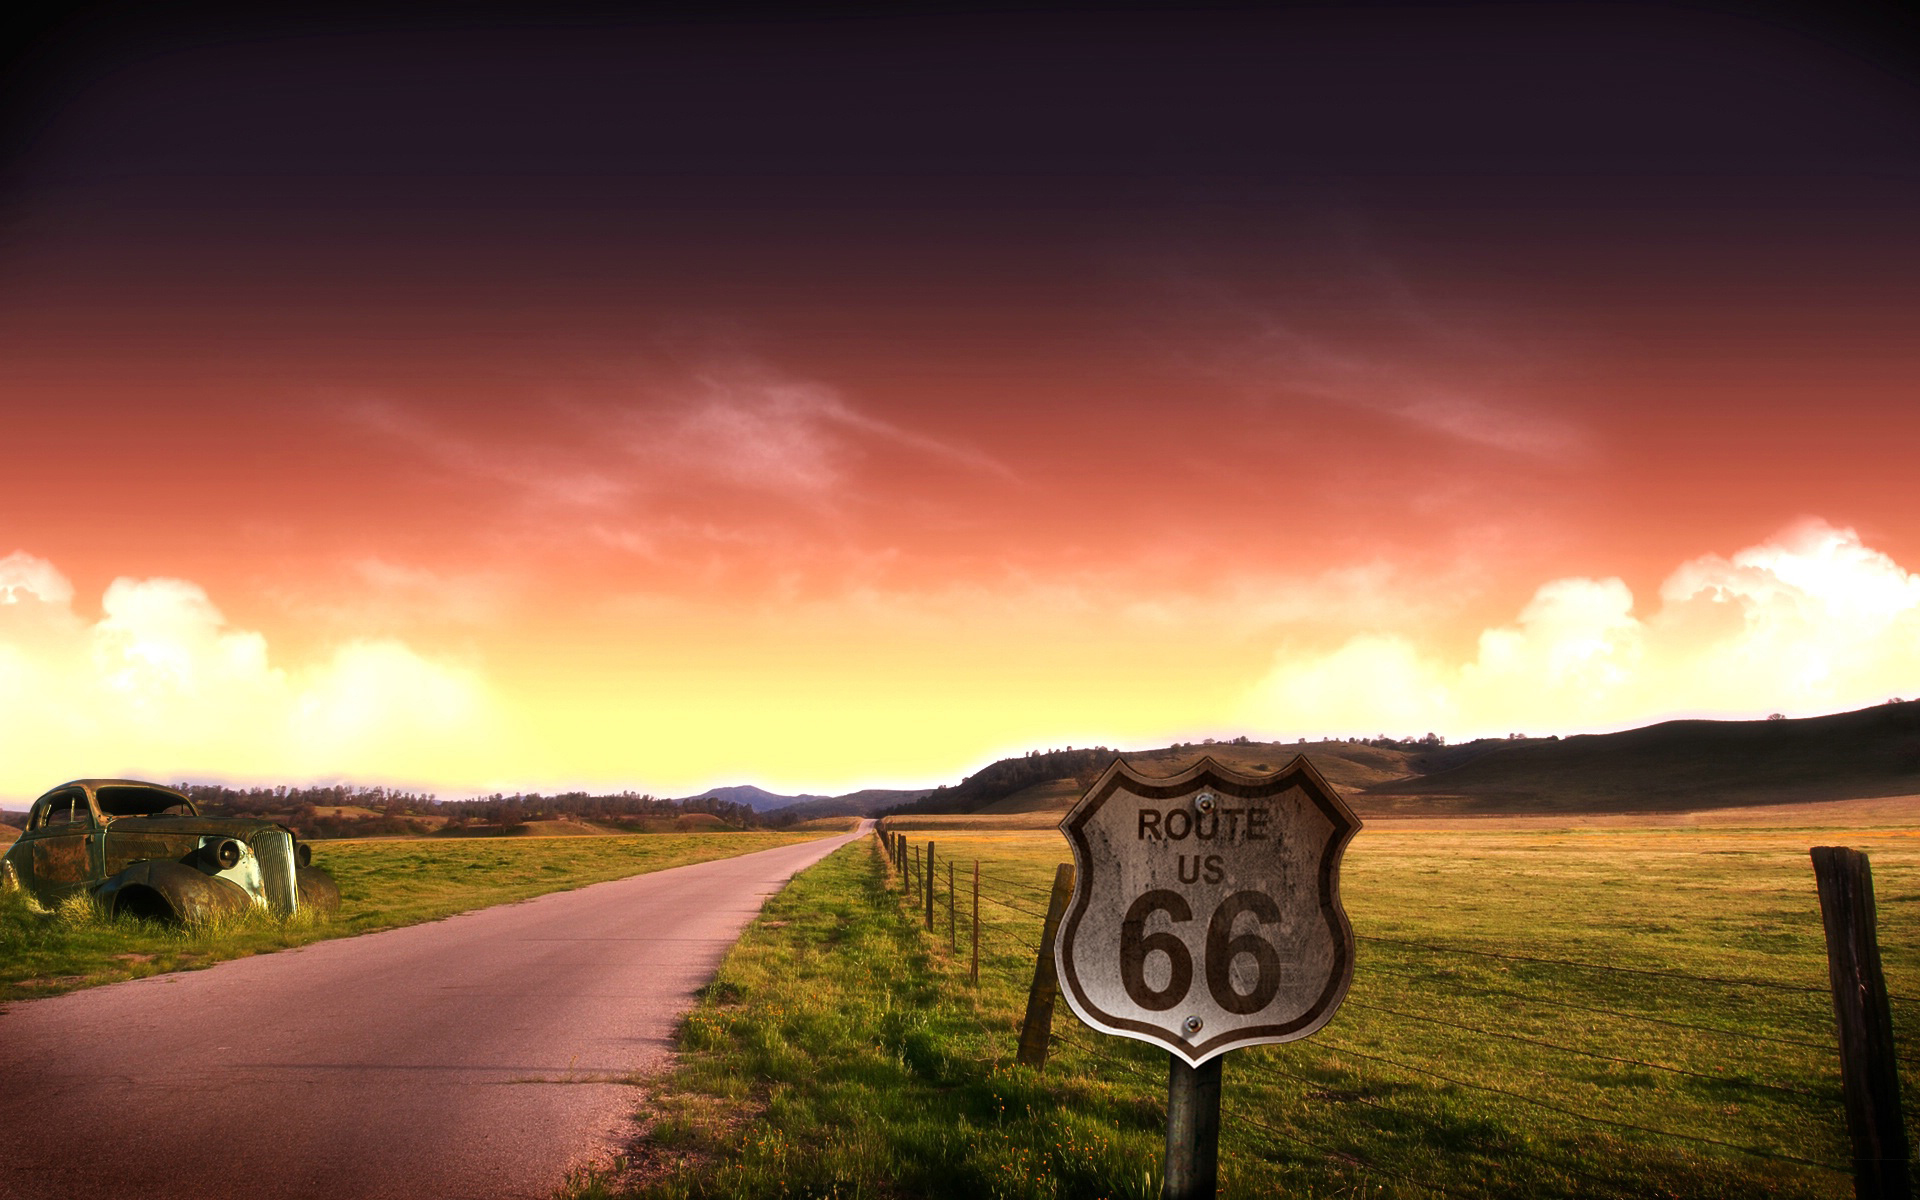 U.S. Route 66 is established on November 11th, 1926 and closed on June 27th, 1985.